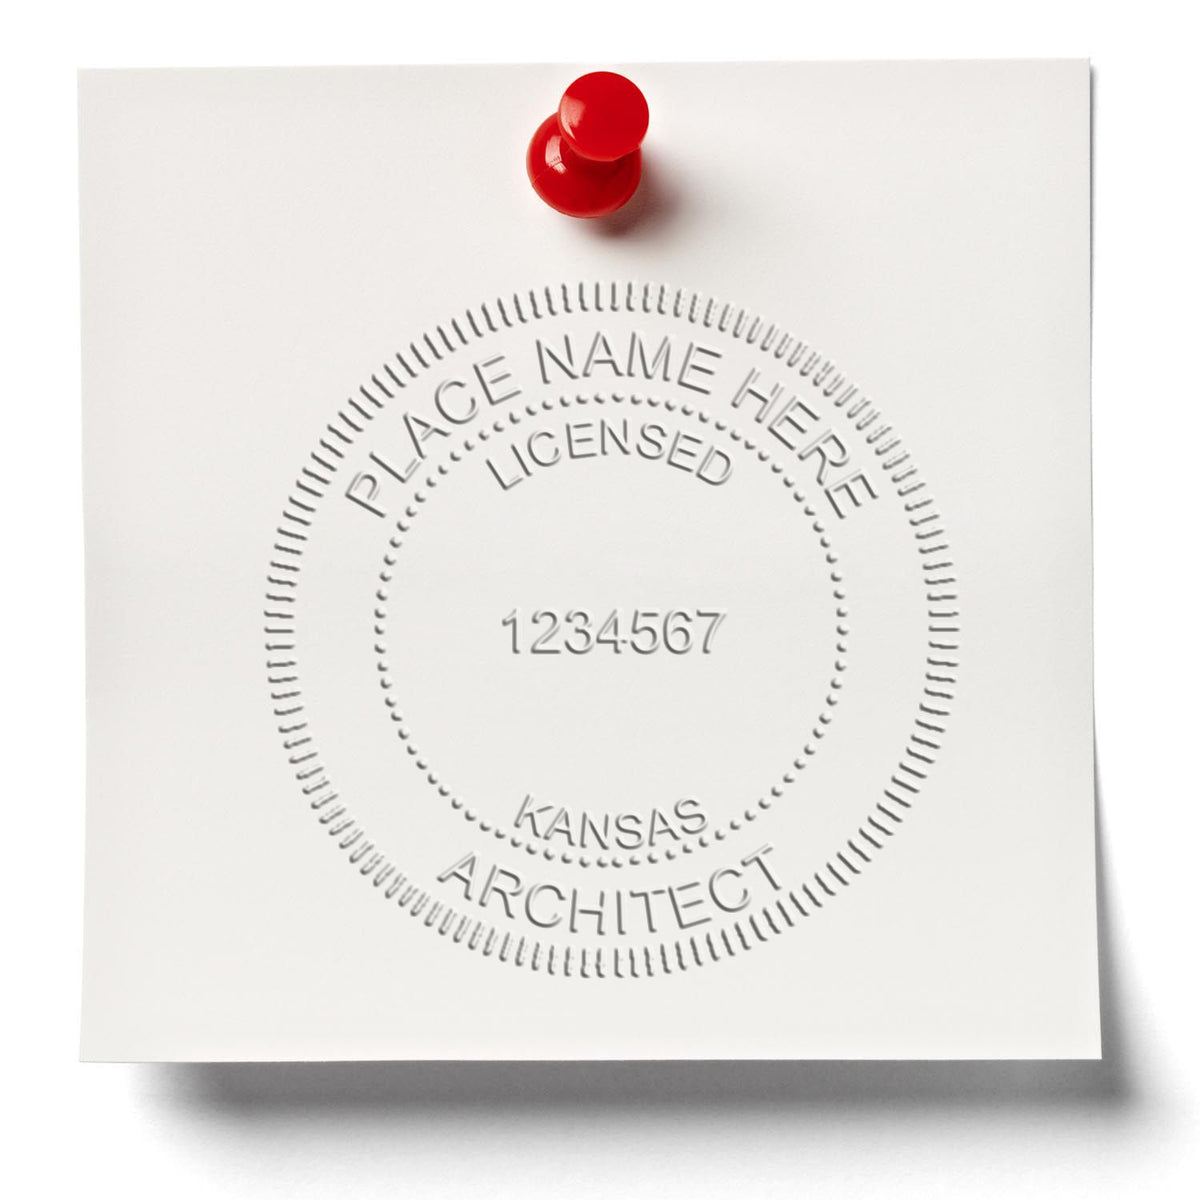 A lifestyle photo showing a stamped image of the Kansas Desk Architect Embossing Seal on a piece of paper